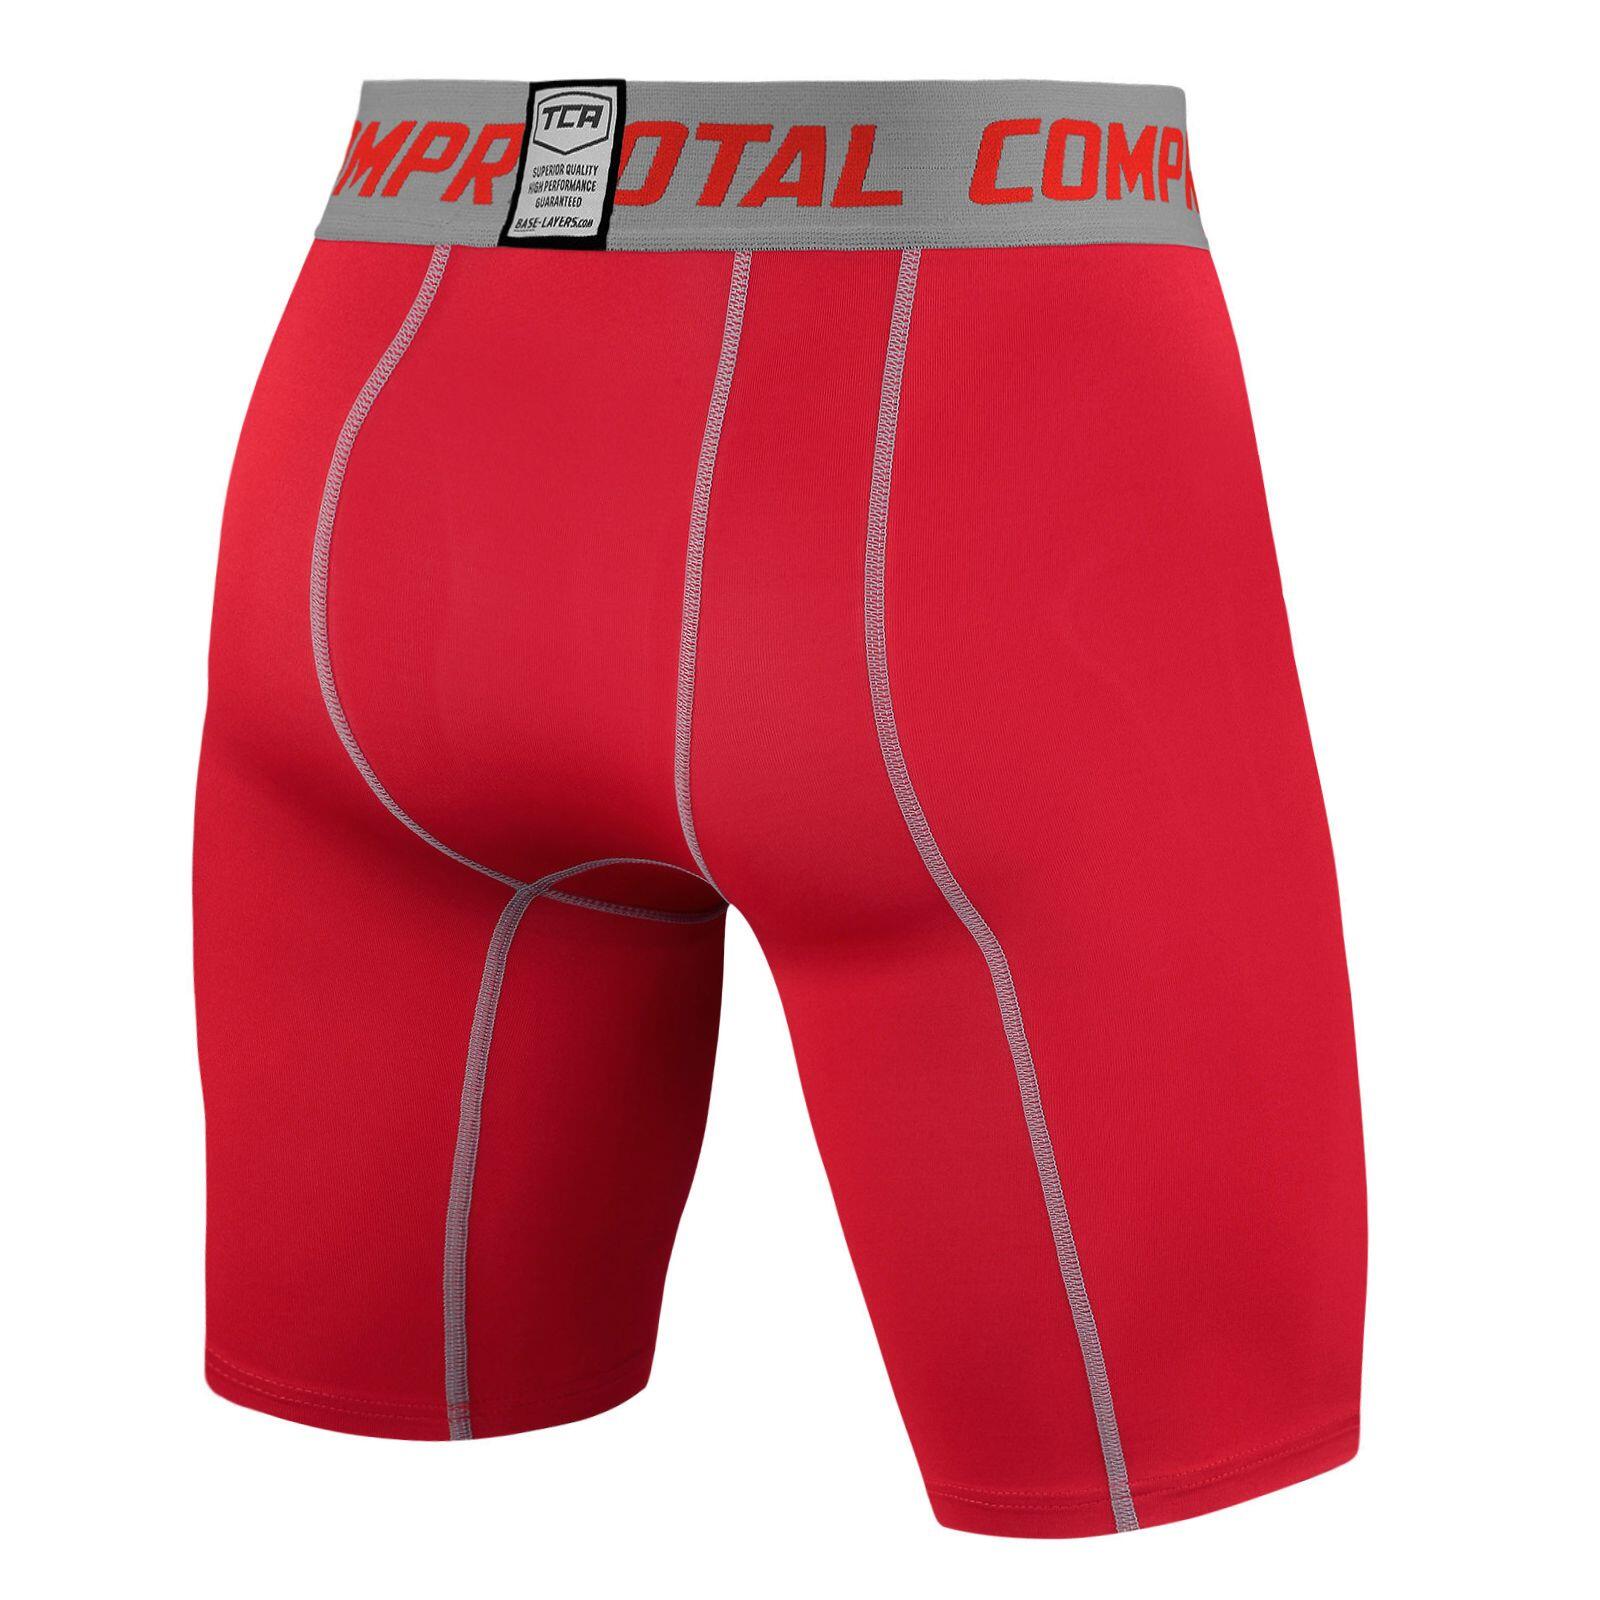 Boys' Performance Base Layer Compression Shorts - Team Red 2/5